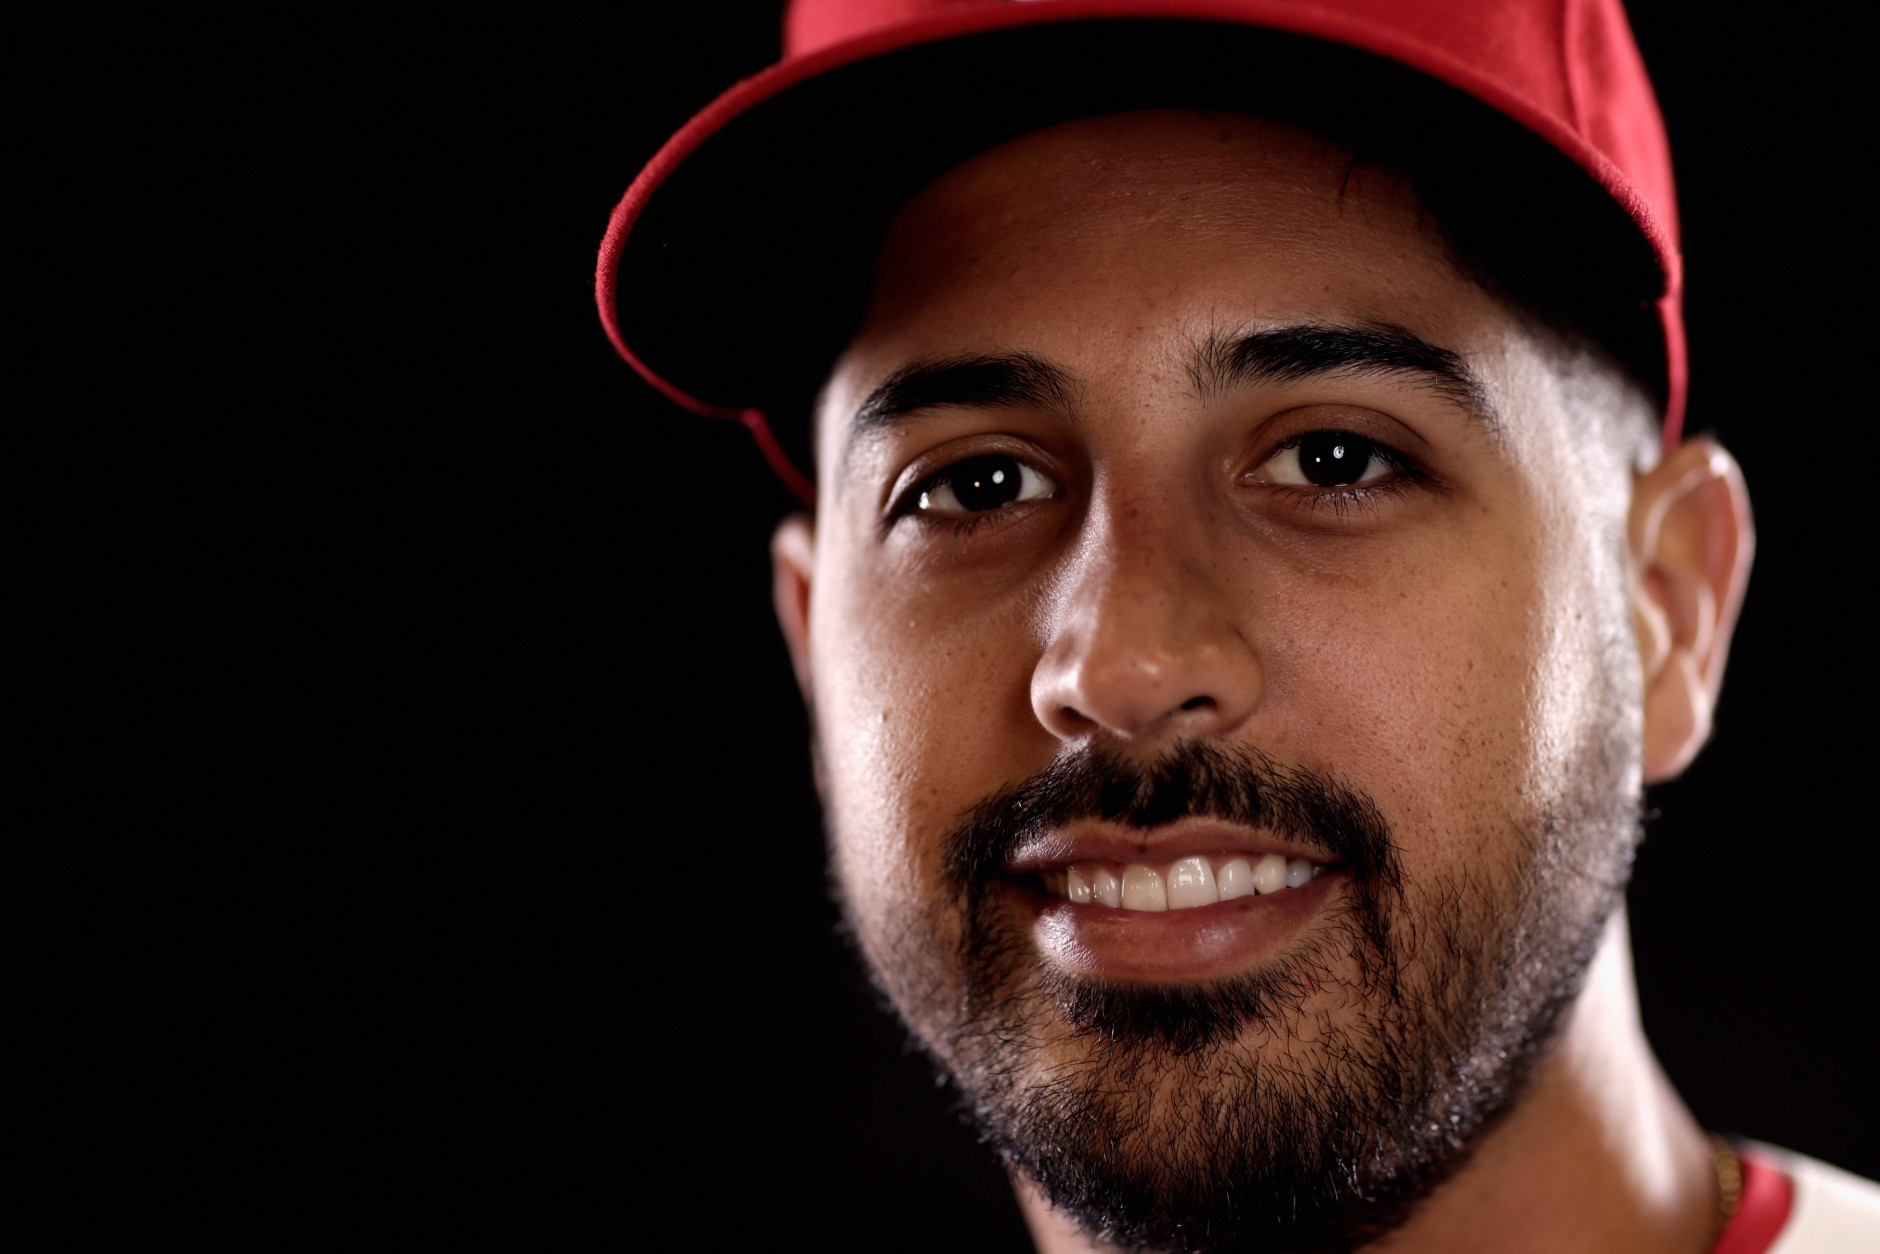 VIERA, FL - MARCH 01:  Gio Gonzalez #47 of the Washington Nationals poses for a portrait during photo day at Space Coast Stadium on March 1, 2015 in Viera, Florida.  (Photo by Chris Trotman/Getty Images)